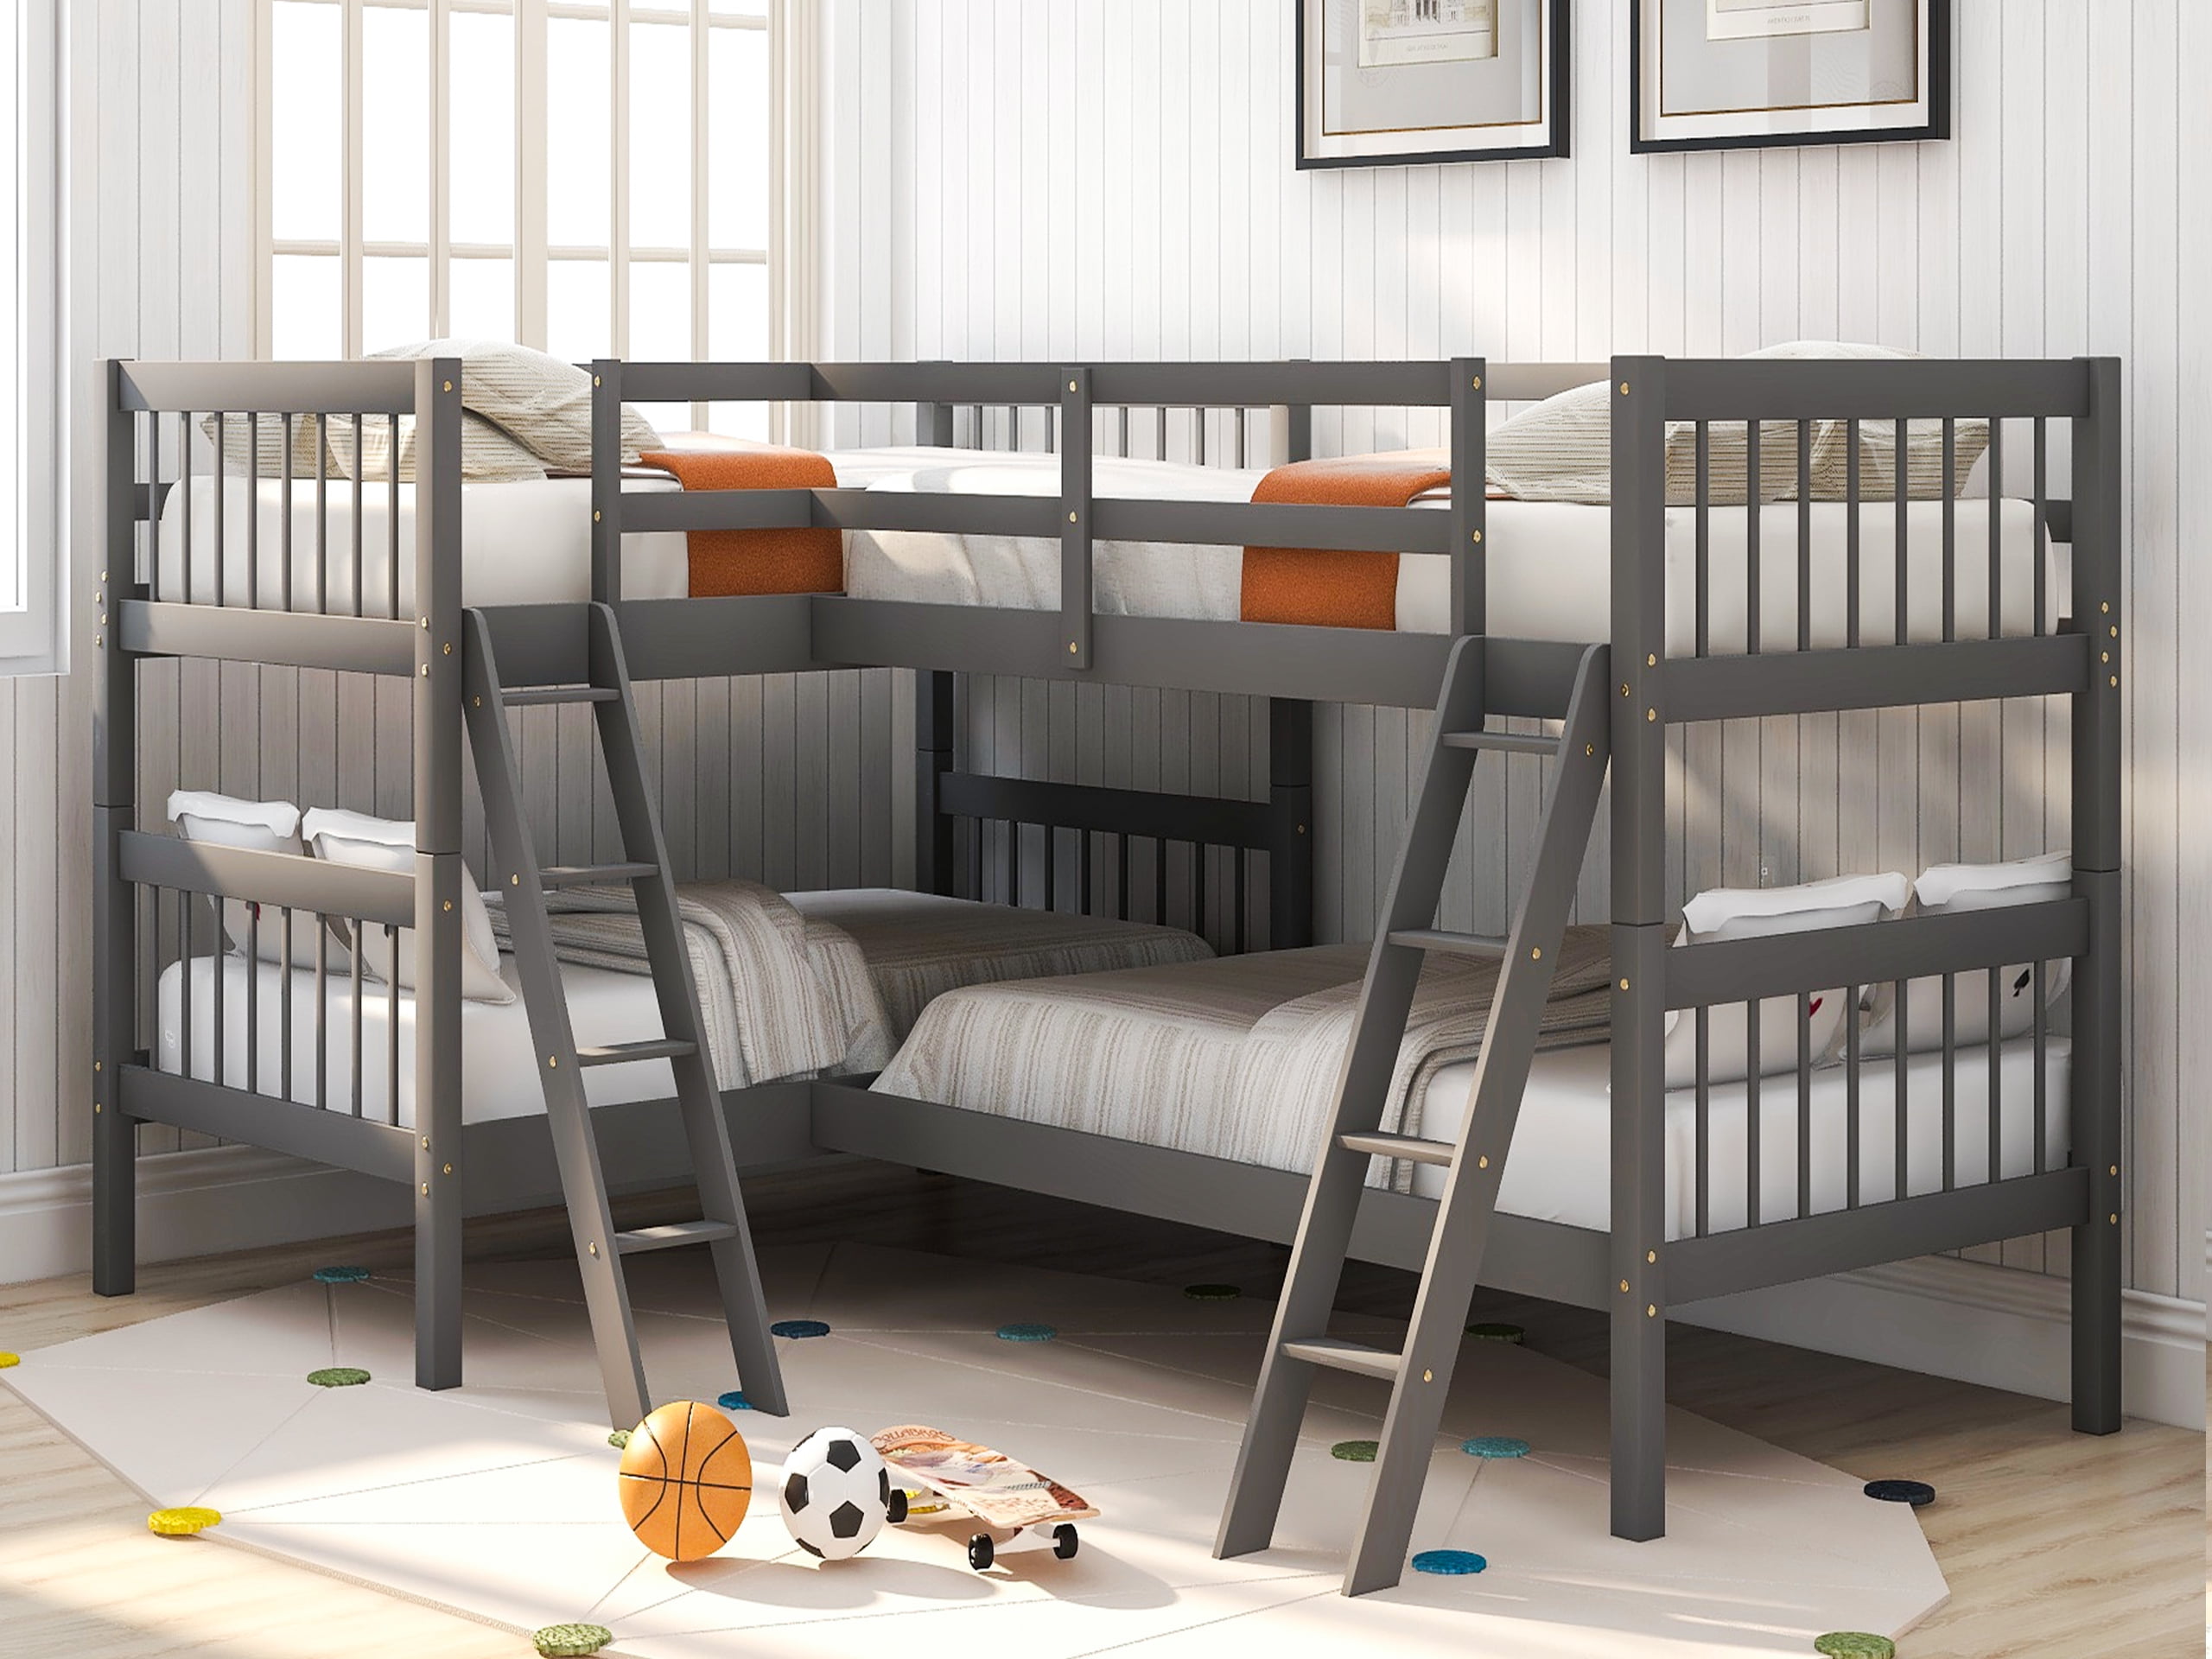 L Shaped Bunk Bed Twin Size Four Kids, Bunk Bed With Bottom Crib